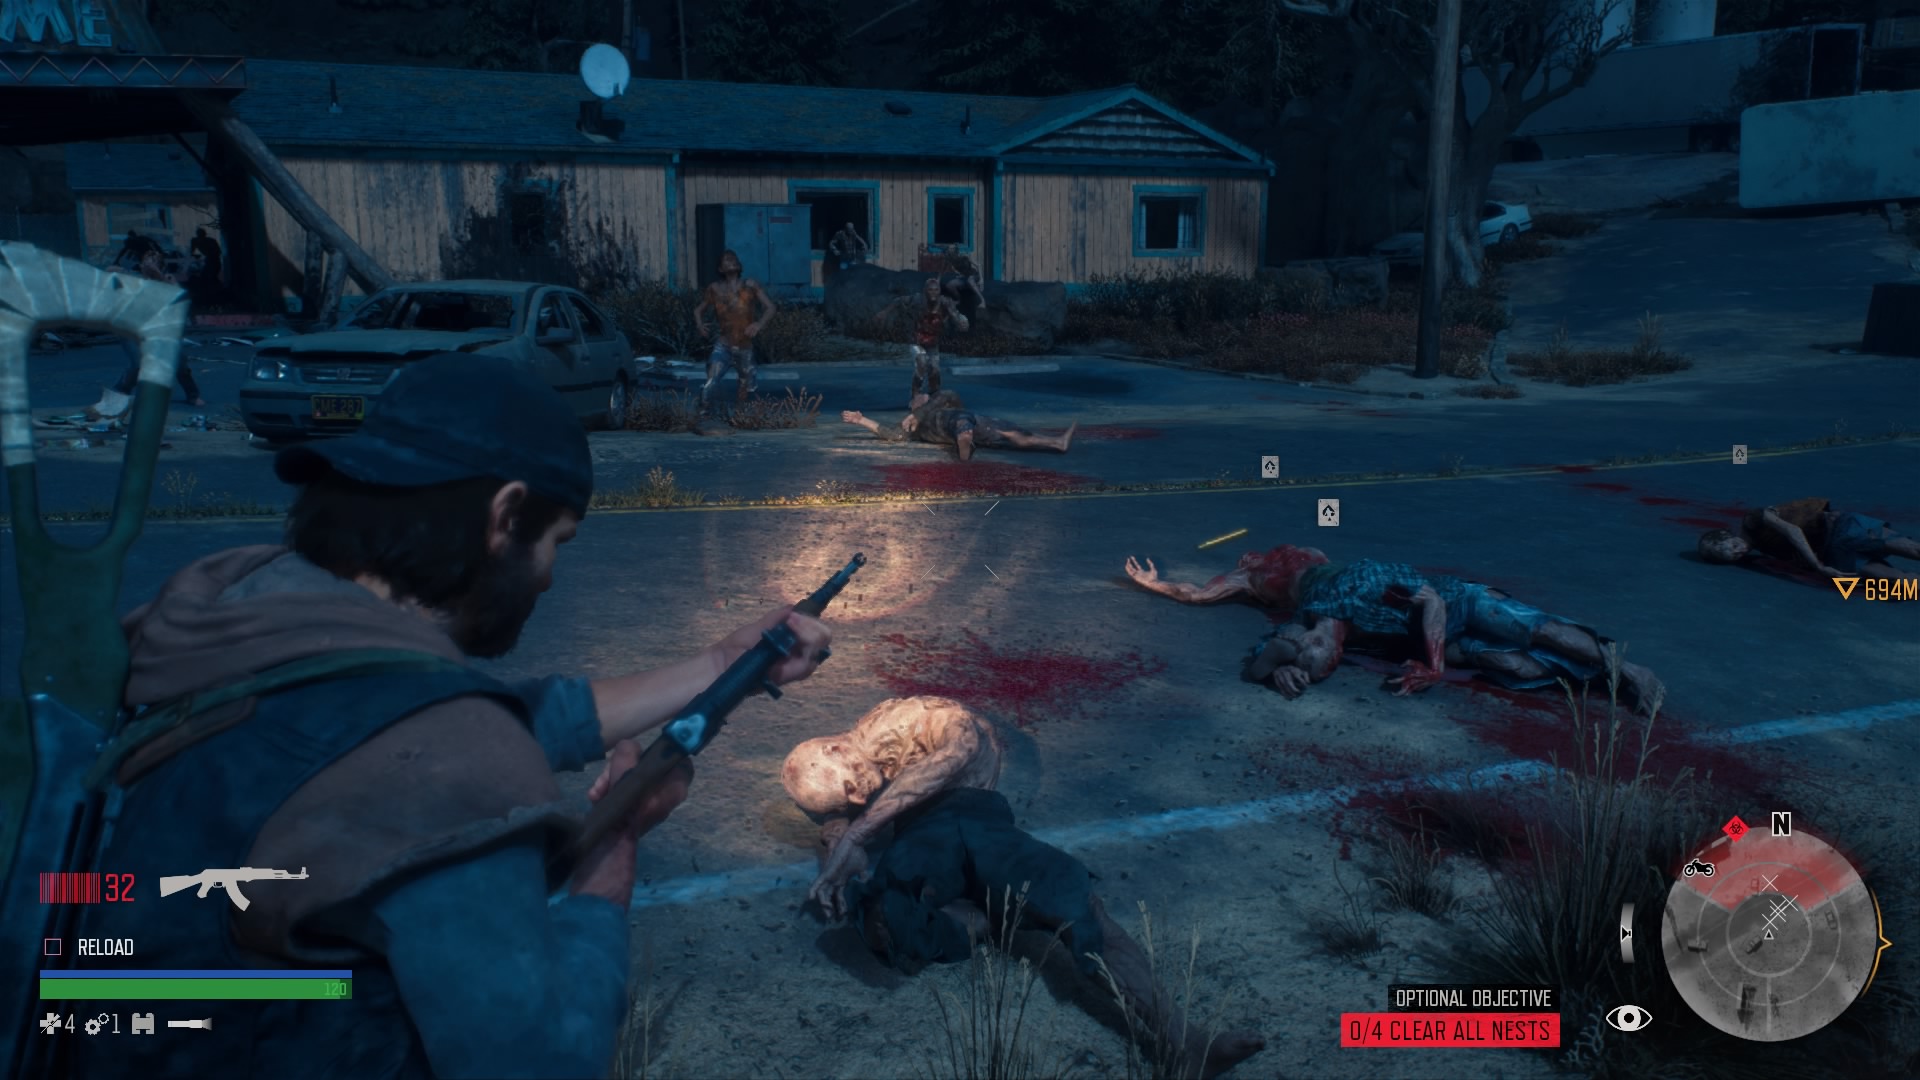 Central Oregon, Now Infested with Hordes of Video Game Zombies